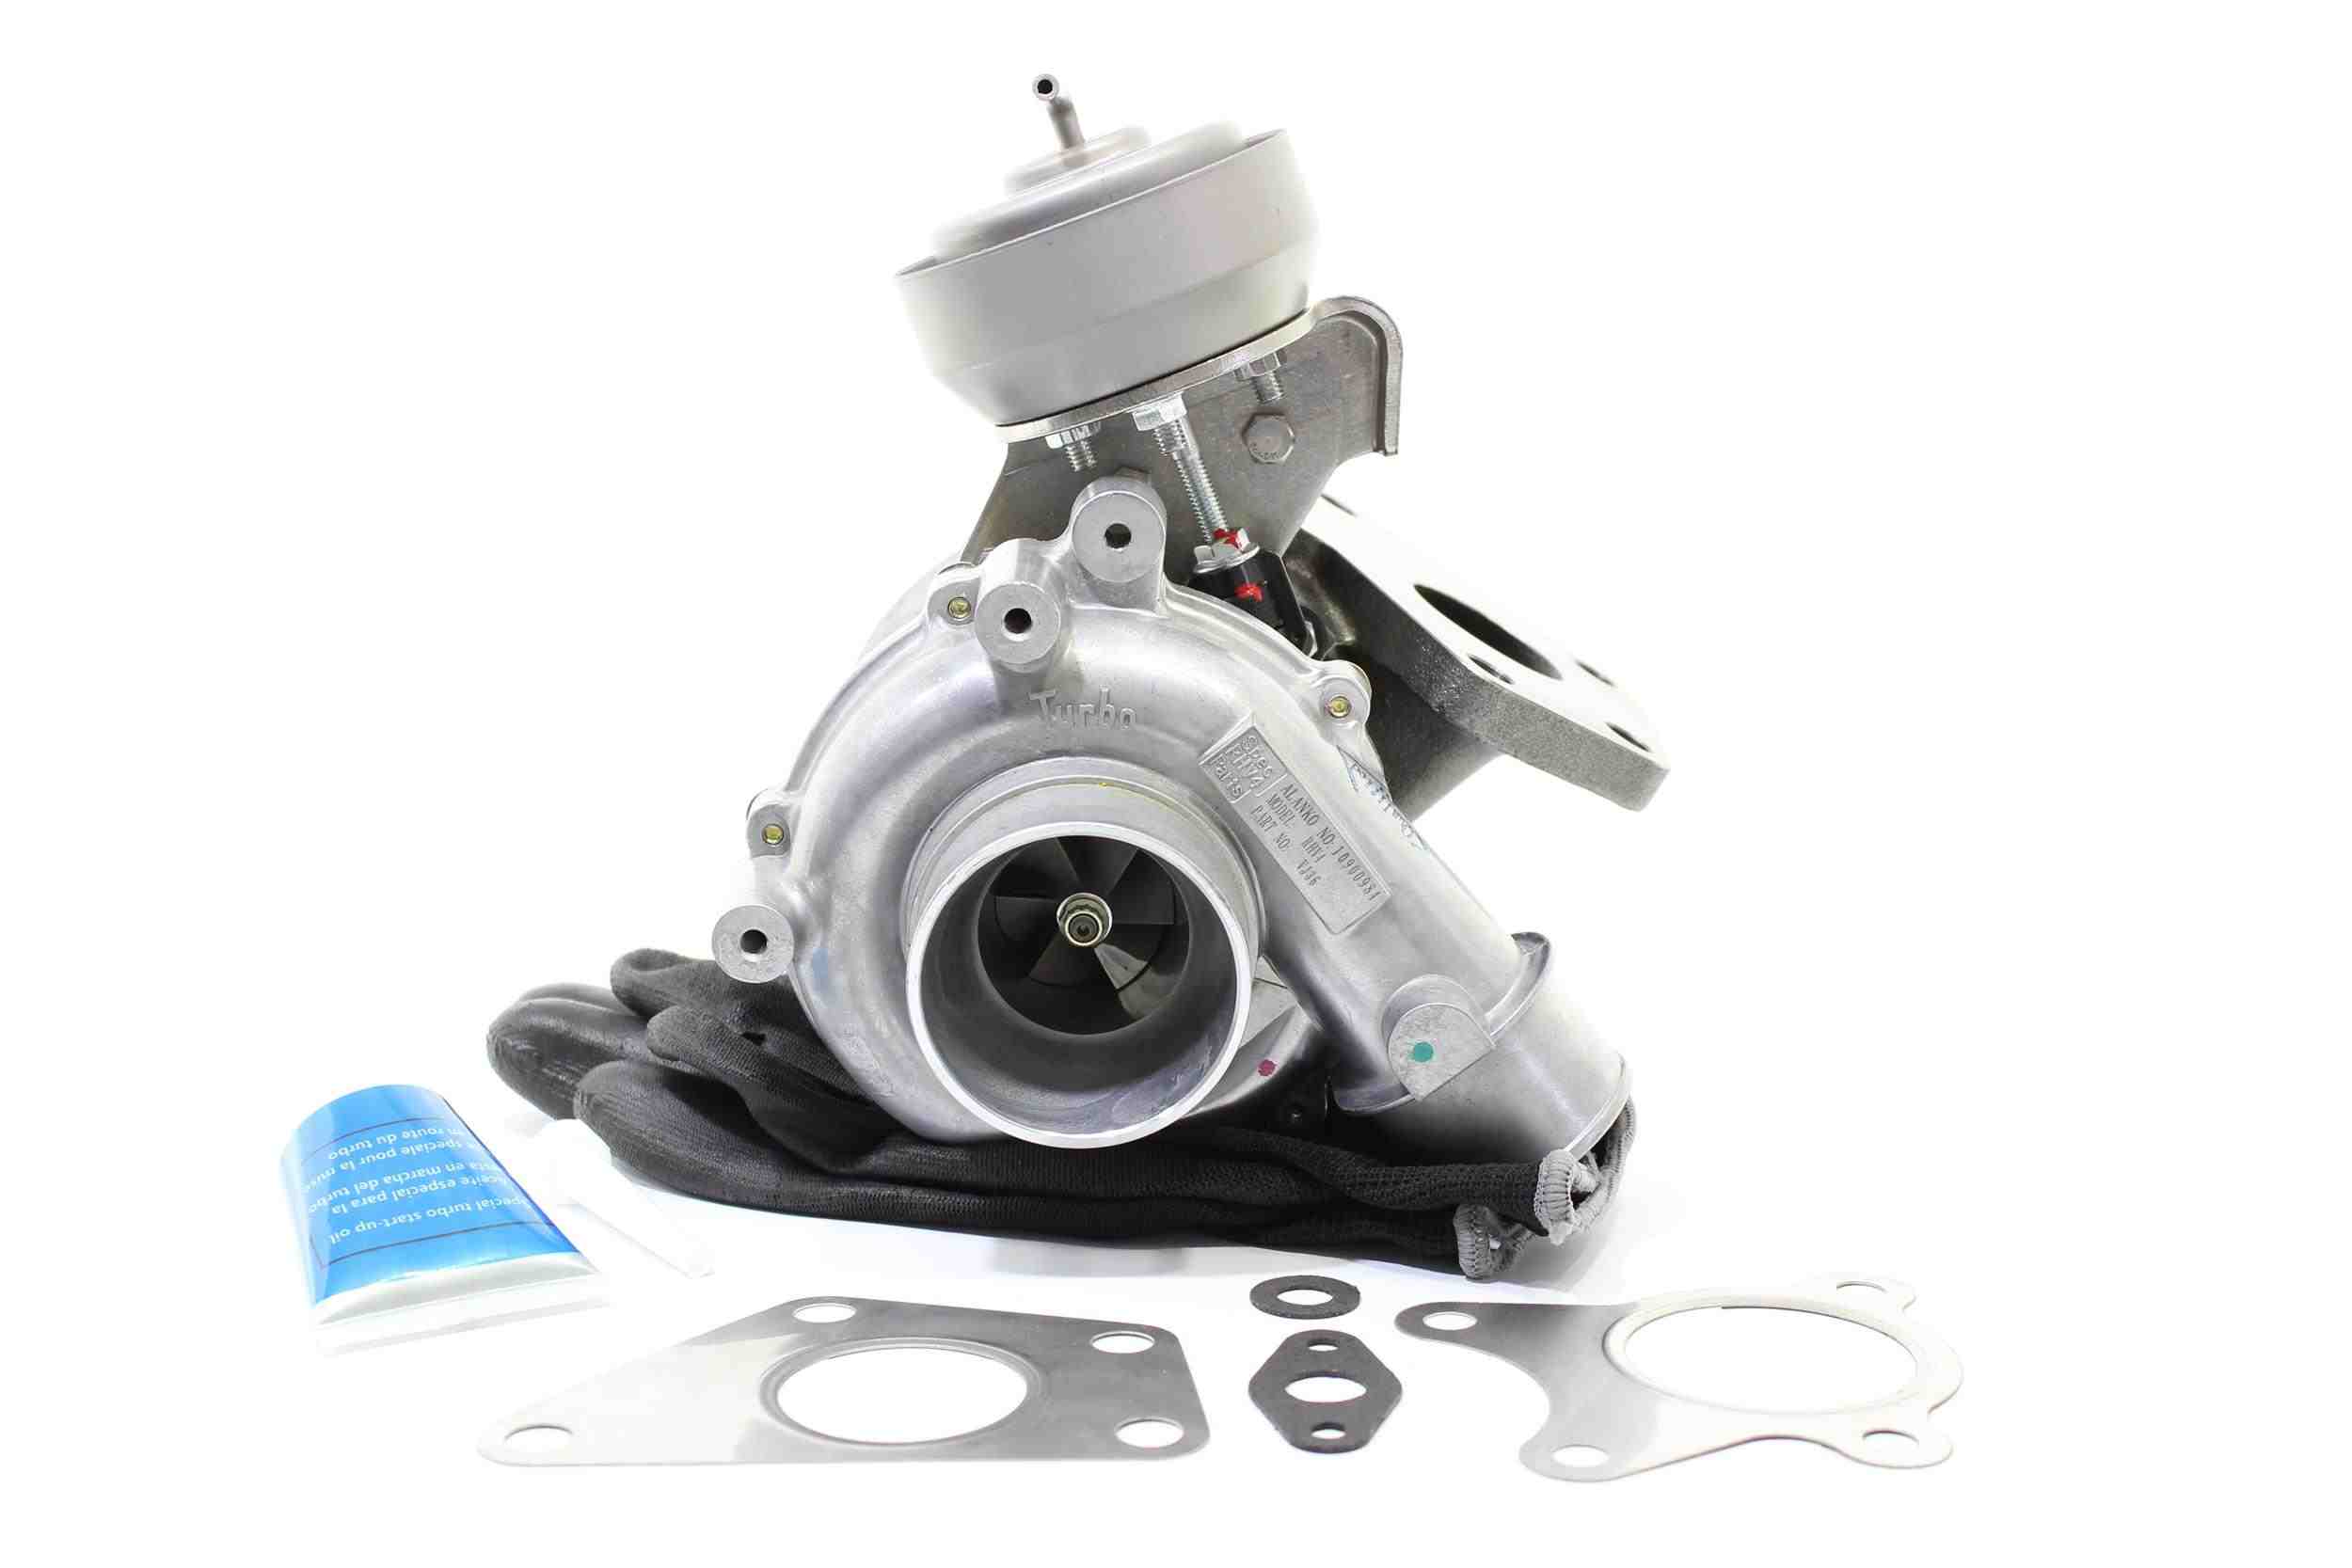 ALANKO 10900984 Turbocharger Exhaust Turbocharger, Turbocharger/Supercharger, Incl. Gasket Set, with attachment material